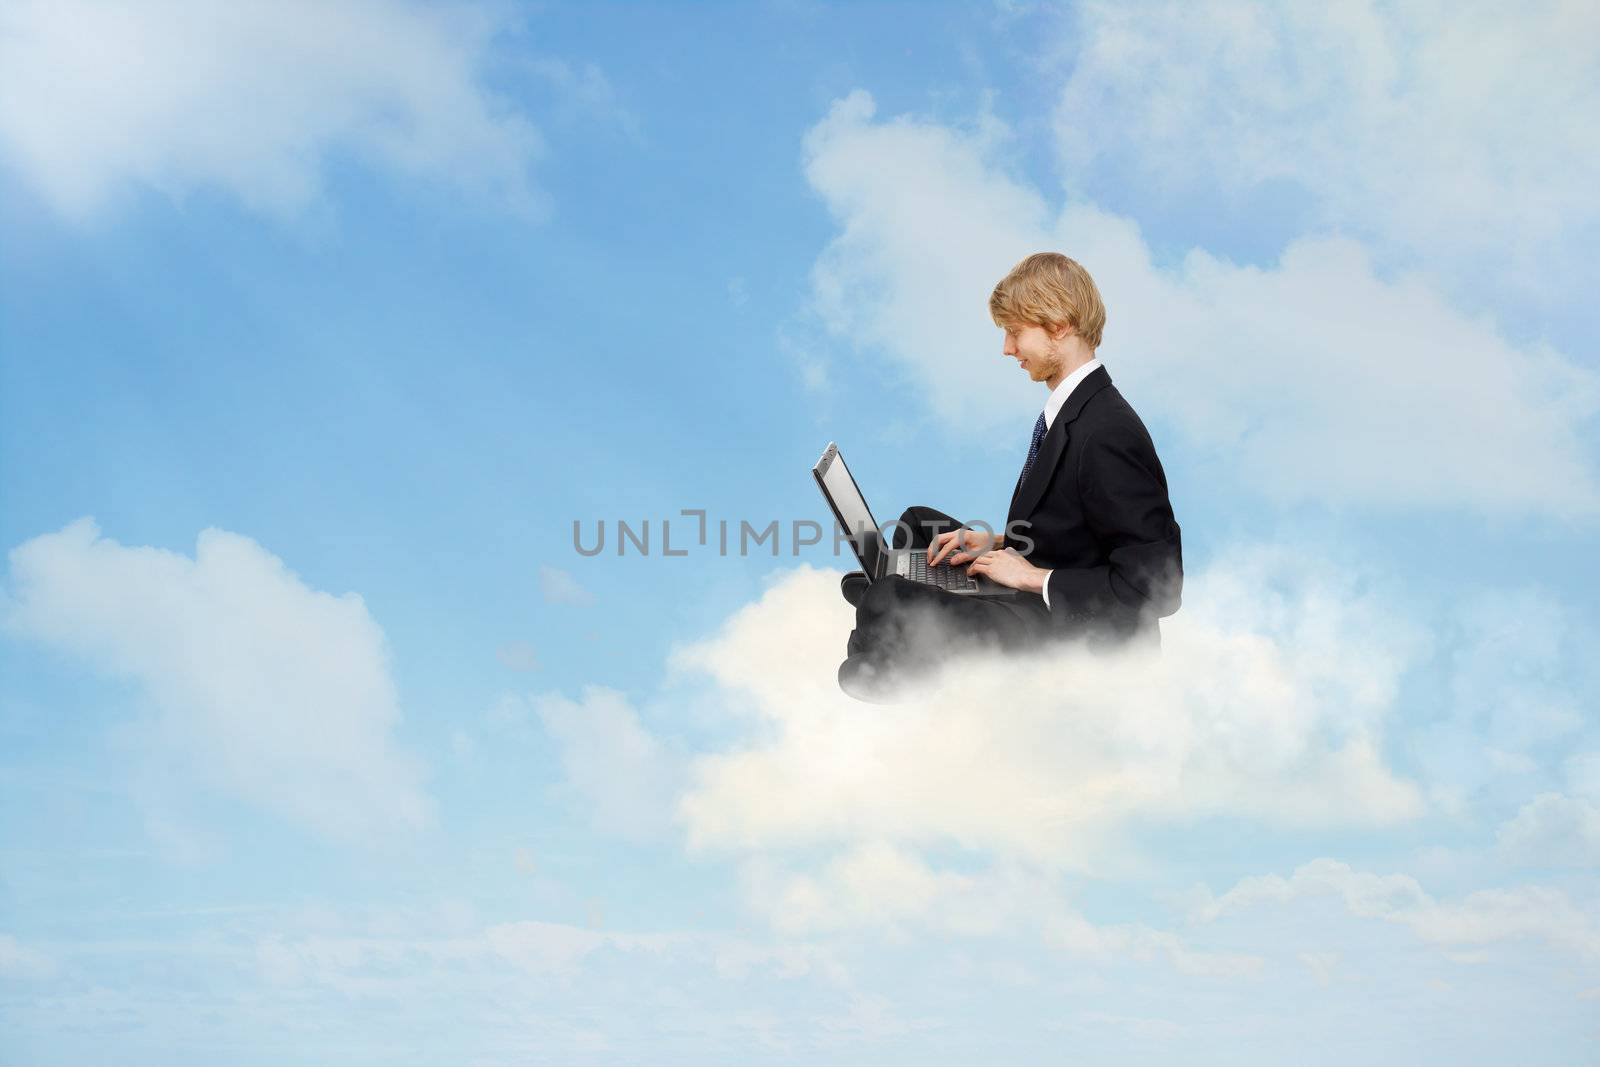 Using a laptop on clouds by melpomene